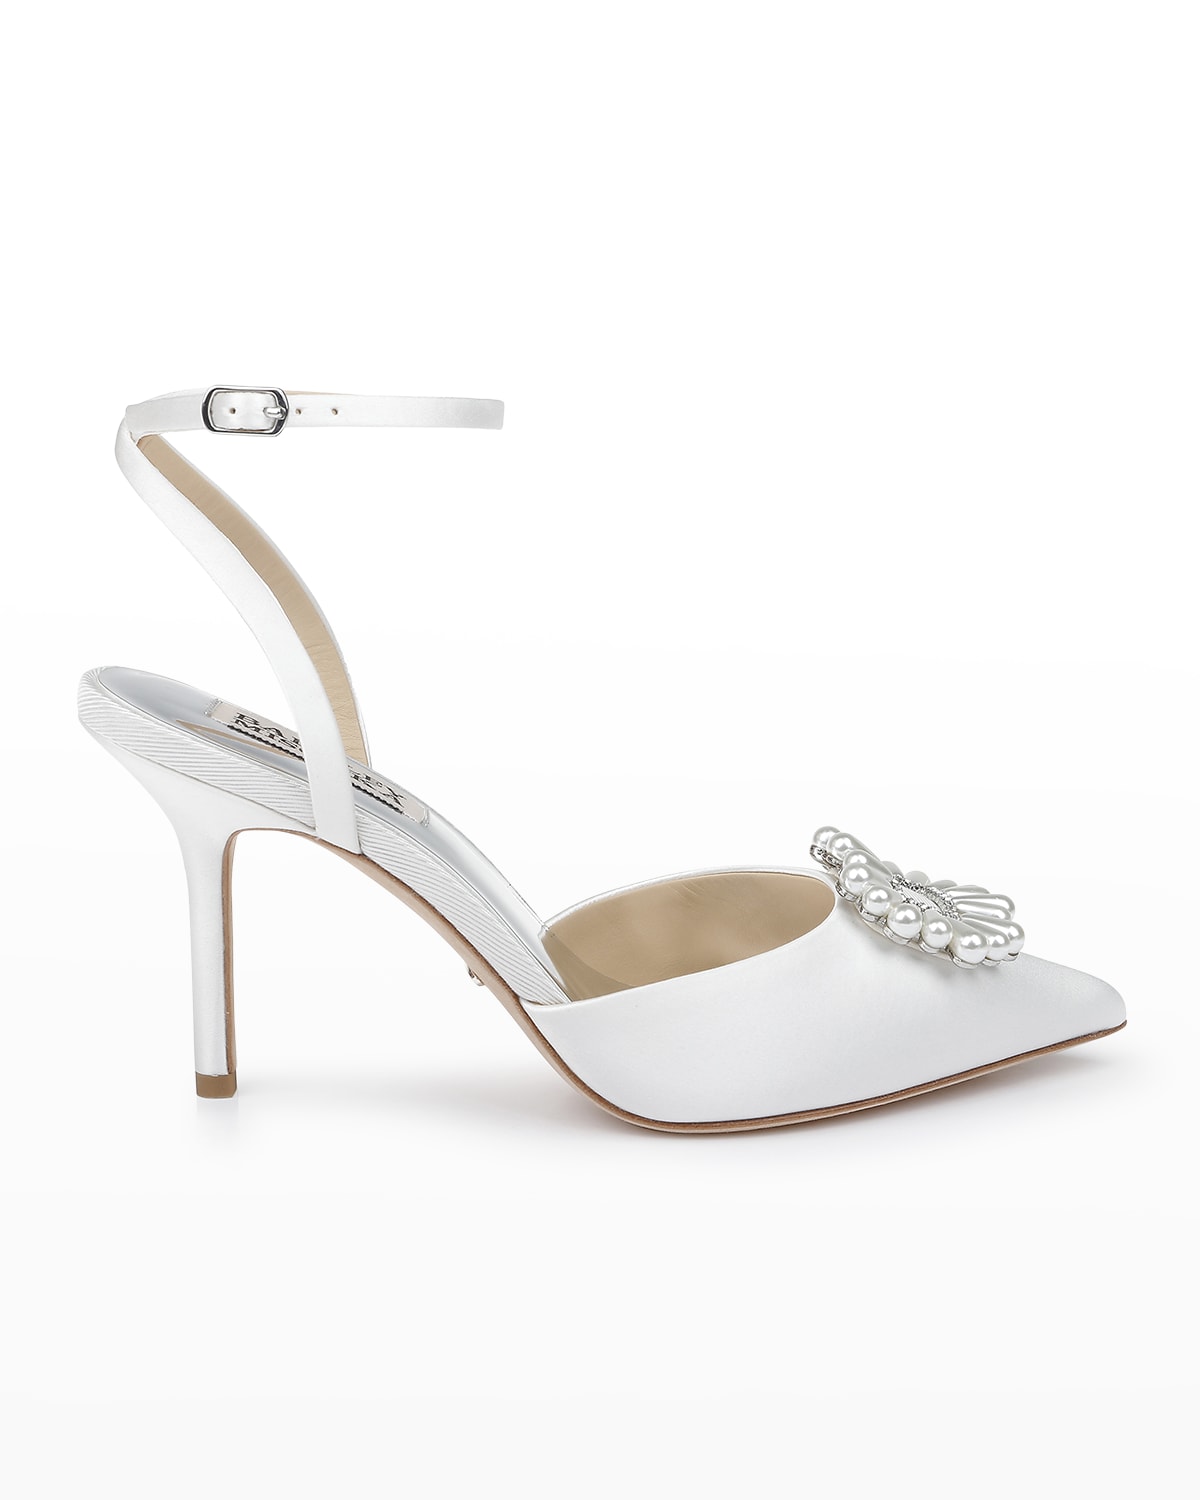 Badgley Mischka Faint Embellished Bow Pointed Pumps | Neiman Marcus